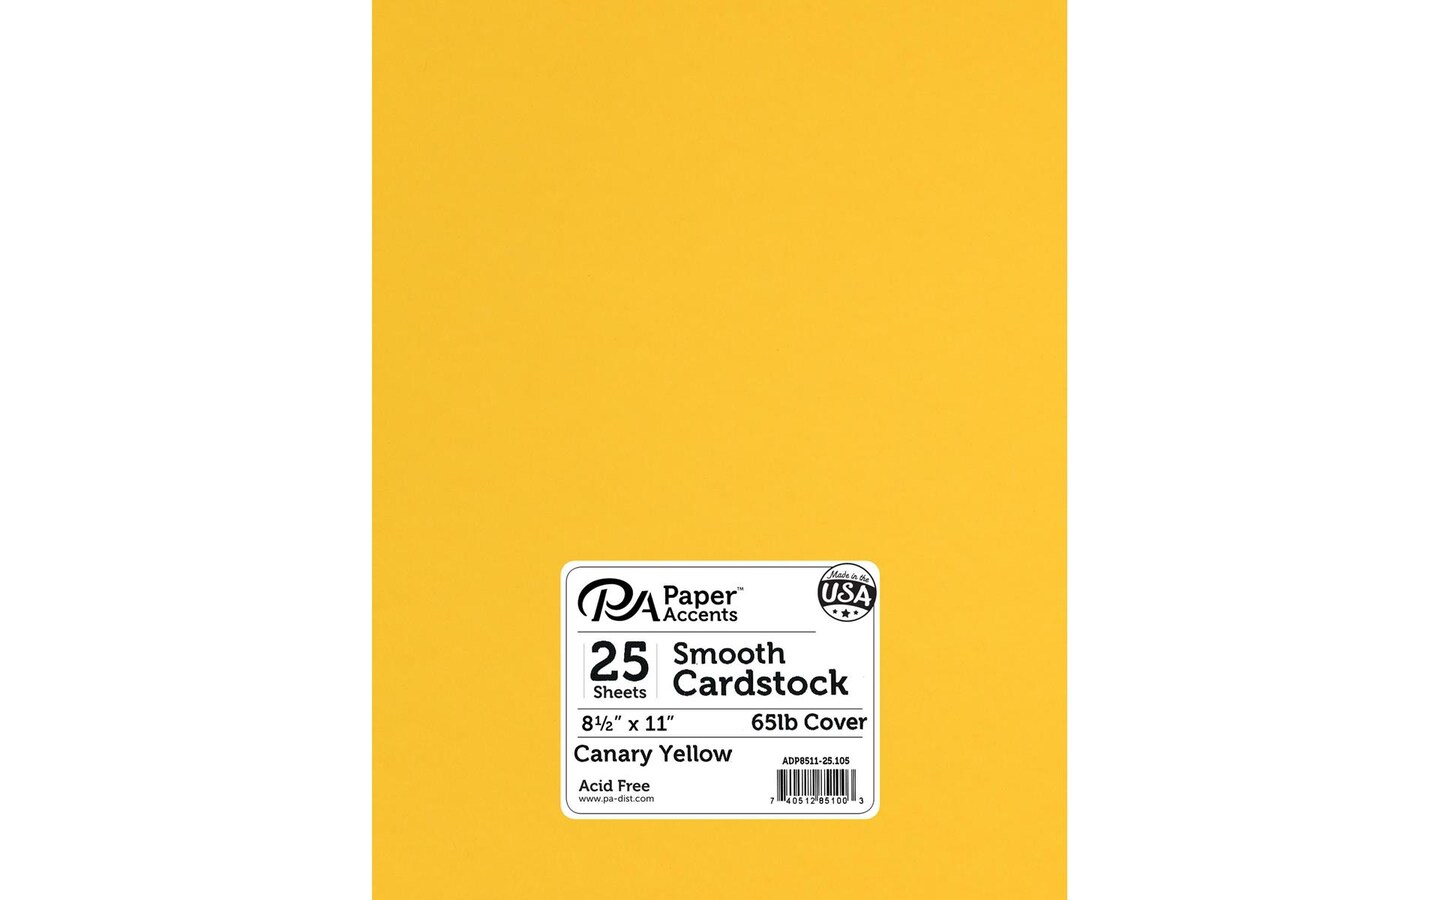 PA Paper Accents Smooth Cardstock 8.5 x 11 Canary Yellow, 65lb colored  cardstock paper for card making, scrapbooking, printing, quilling and  crafts, 25 piece pack